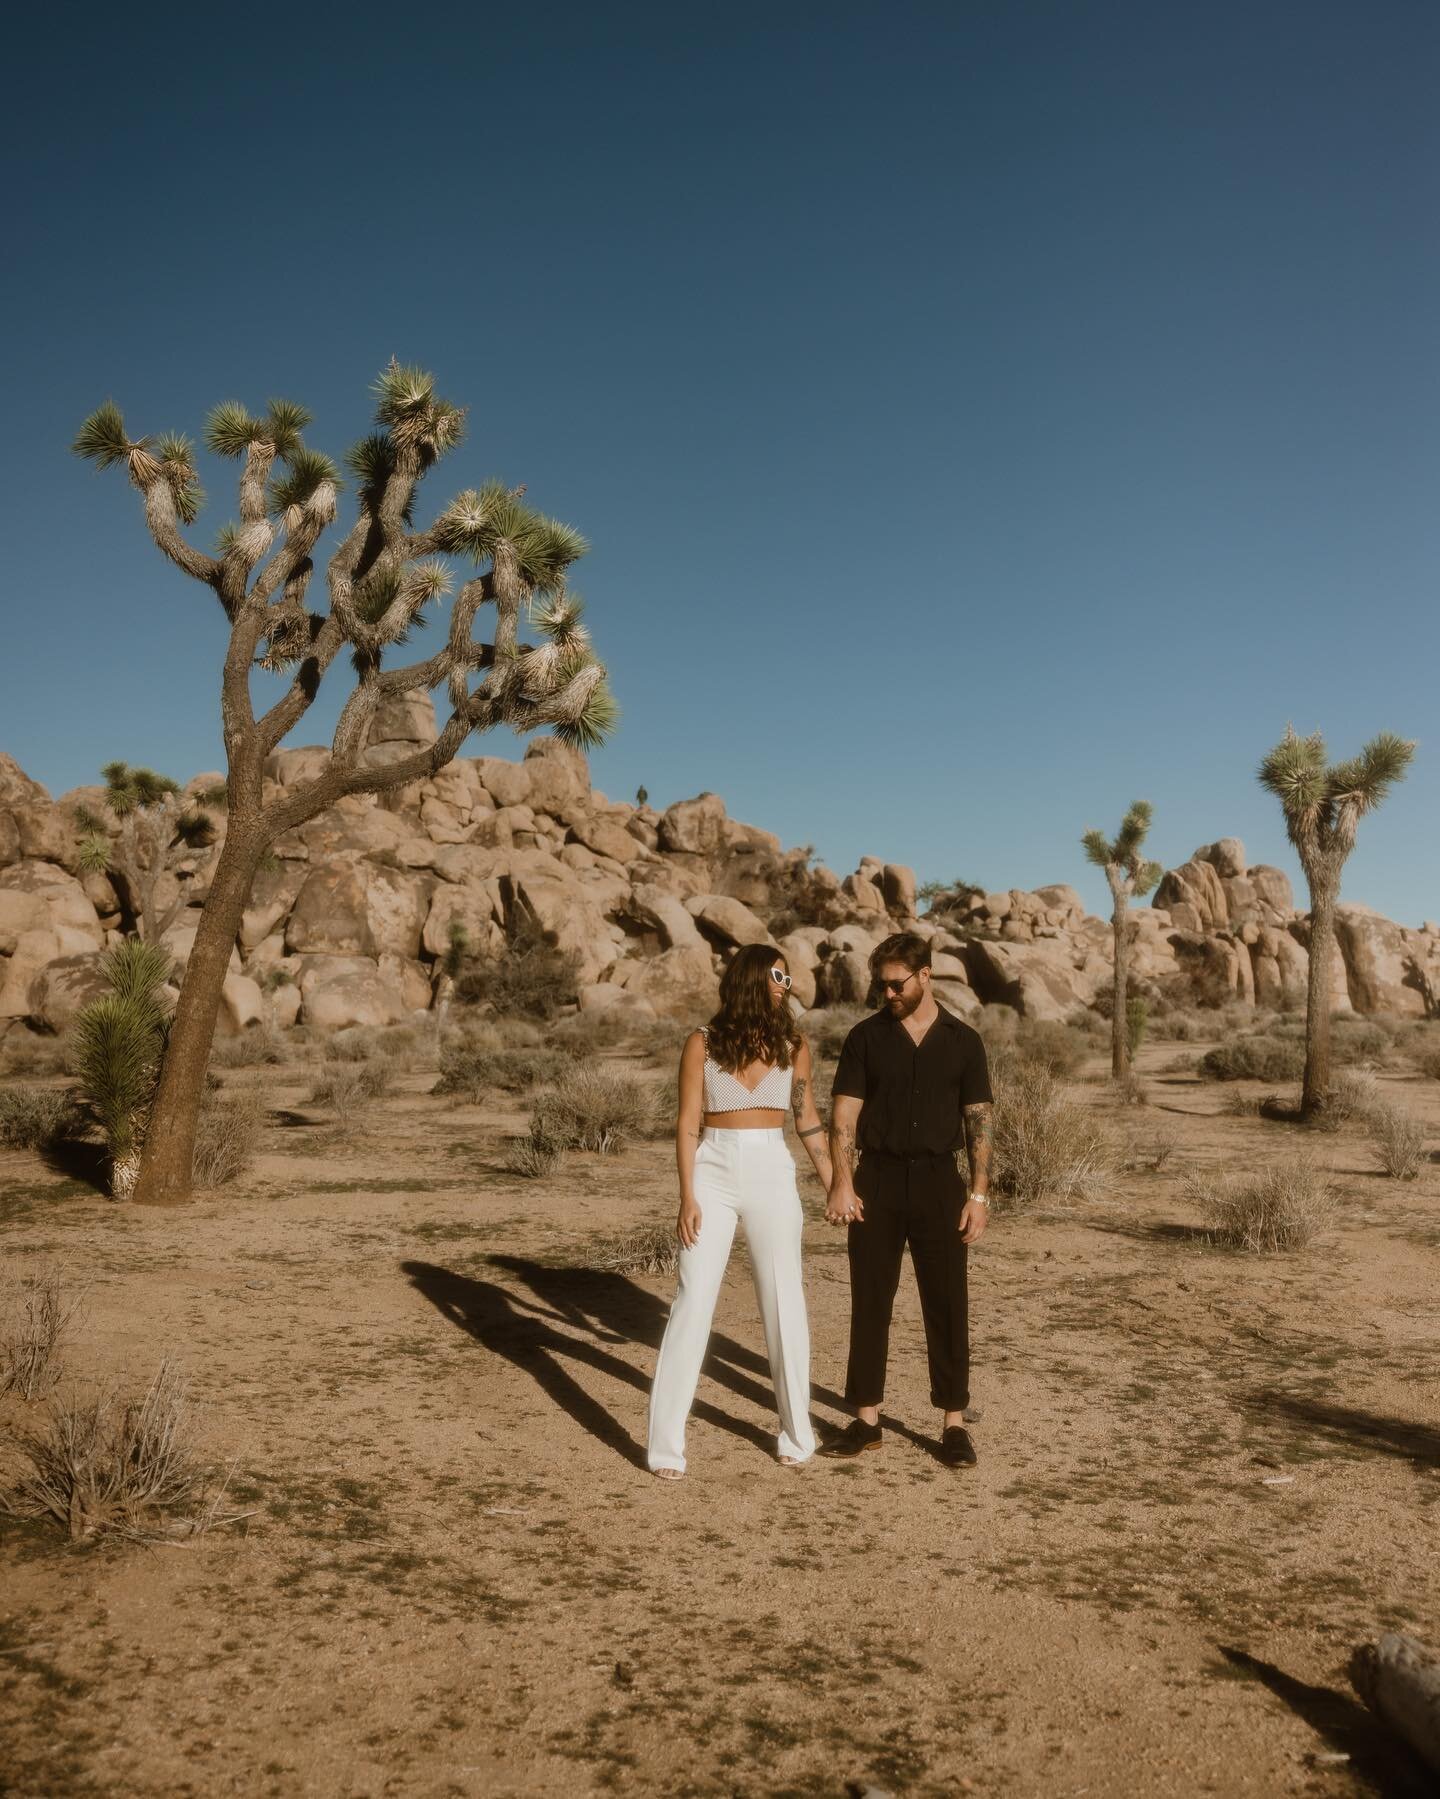 When I first moved to AZ and looking for places to explore, I'd get some pretty mixed opinions on Joshua Tree - either big love for it or pure disdain lol. We met, and I've in the big love club ever since then. #joshuatreenationalpark  #destinationwe